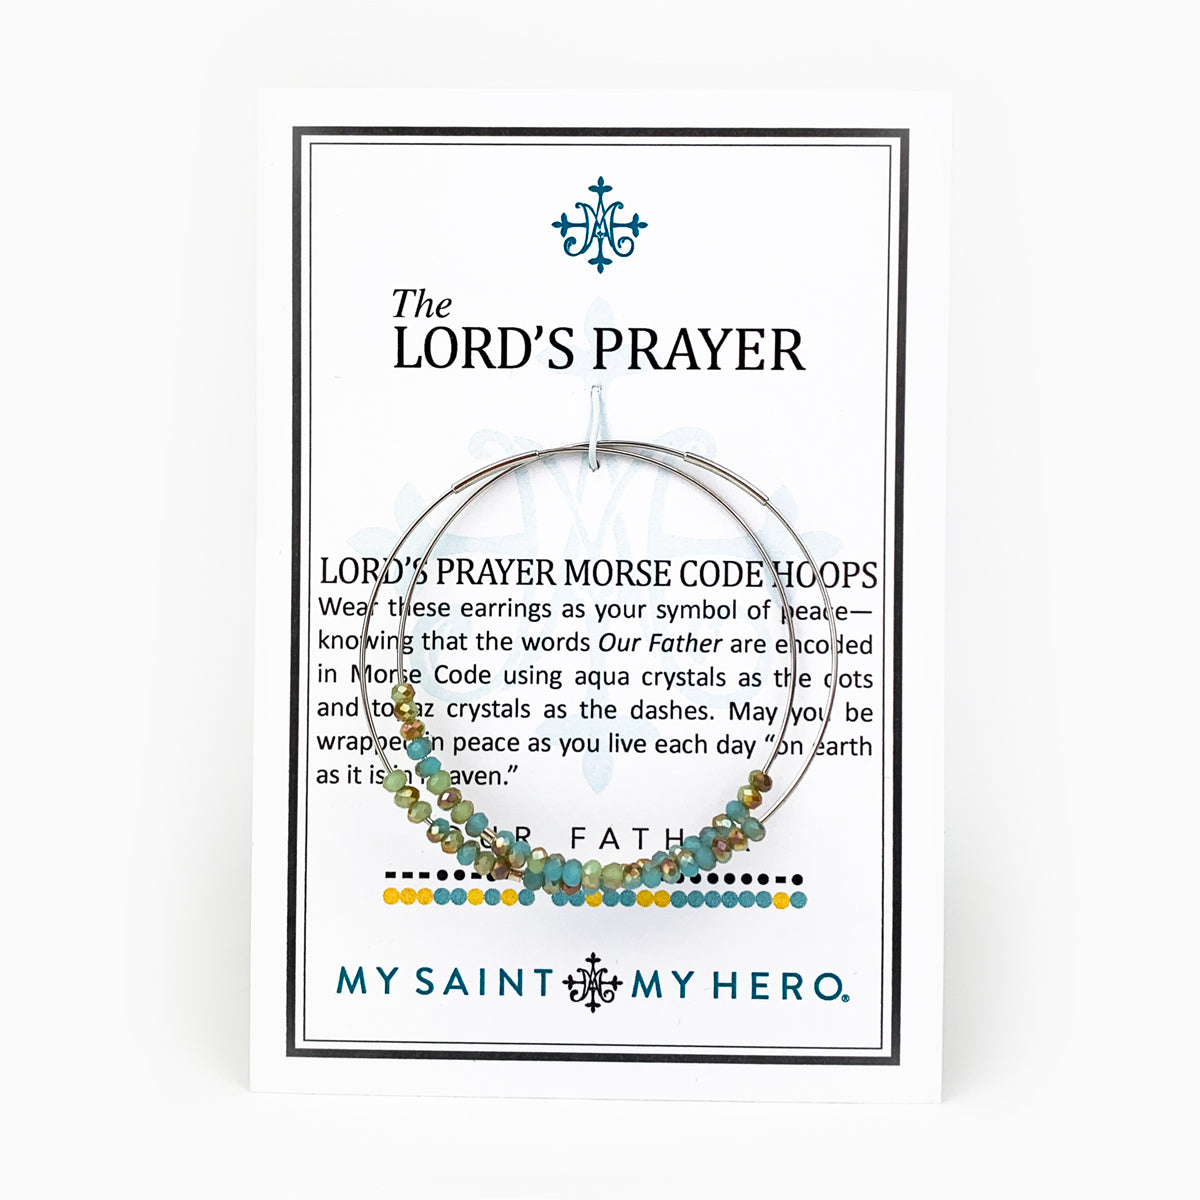 The Lord's Prayer Morse Code Hoops